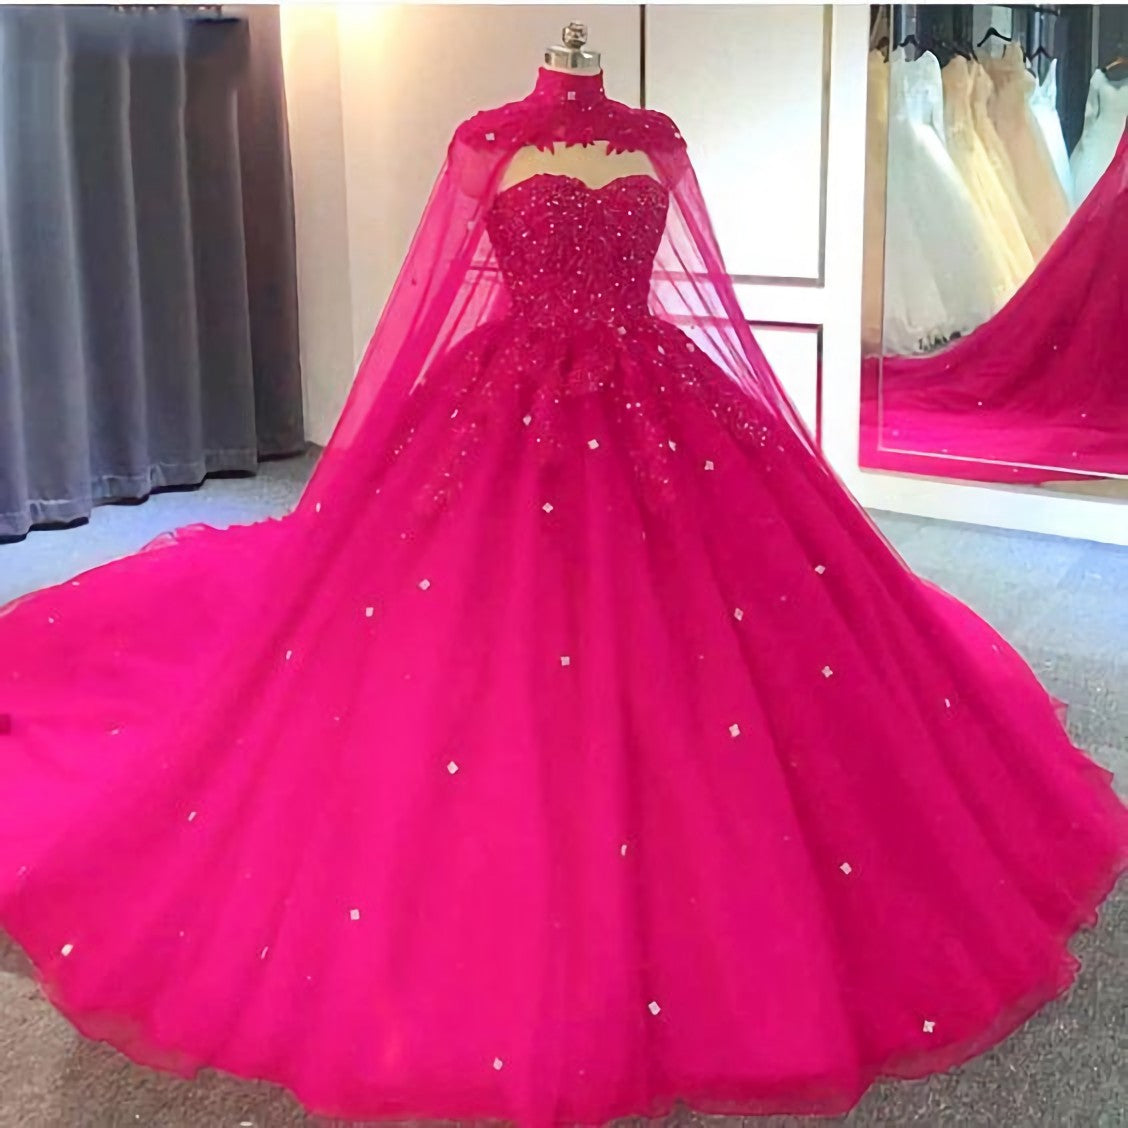 Hot Pink Detachable Cape Quinceanera Sweet 16 Corset Ball Gown Corset Prom Dress outfits, Homecoming Dress Inspo